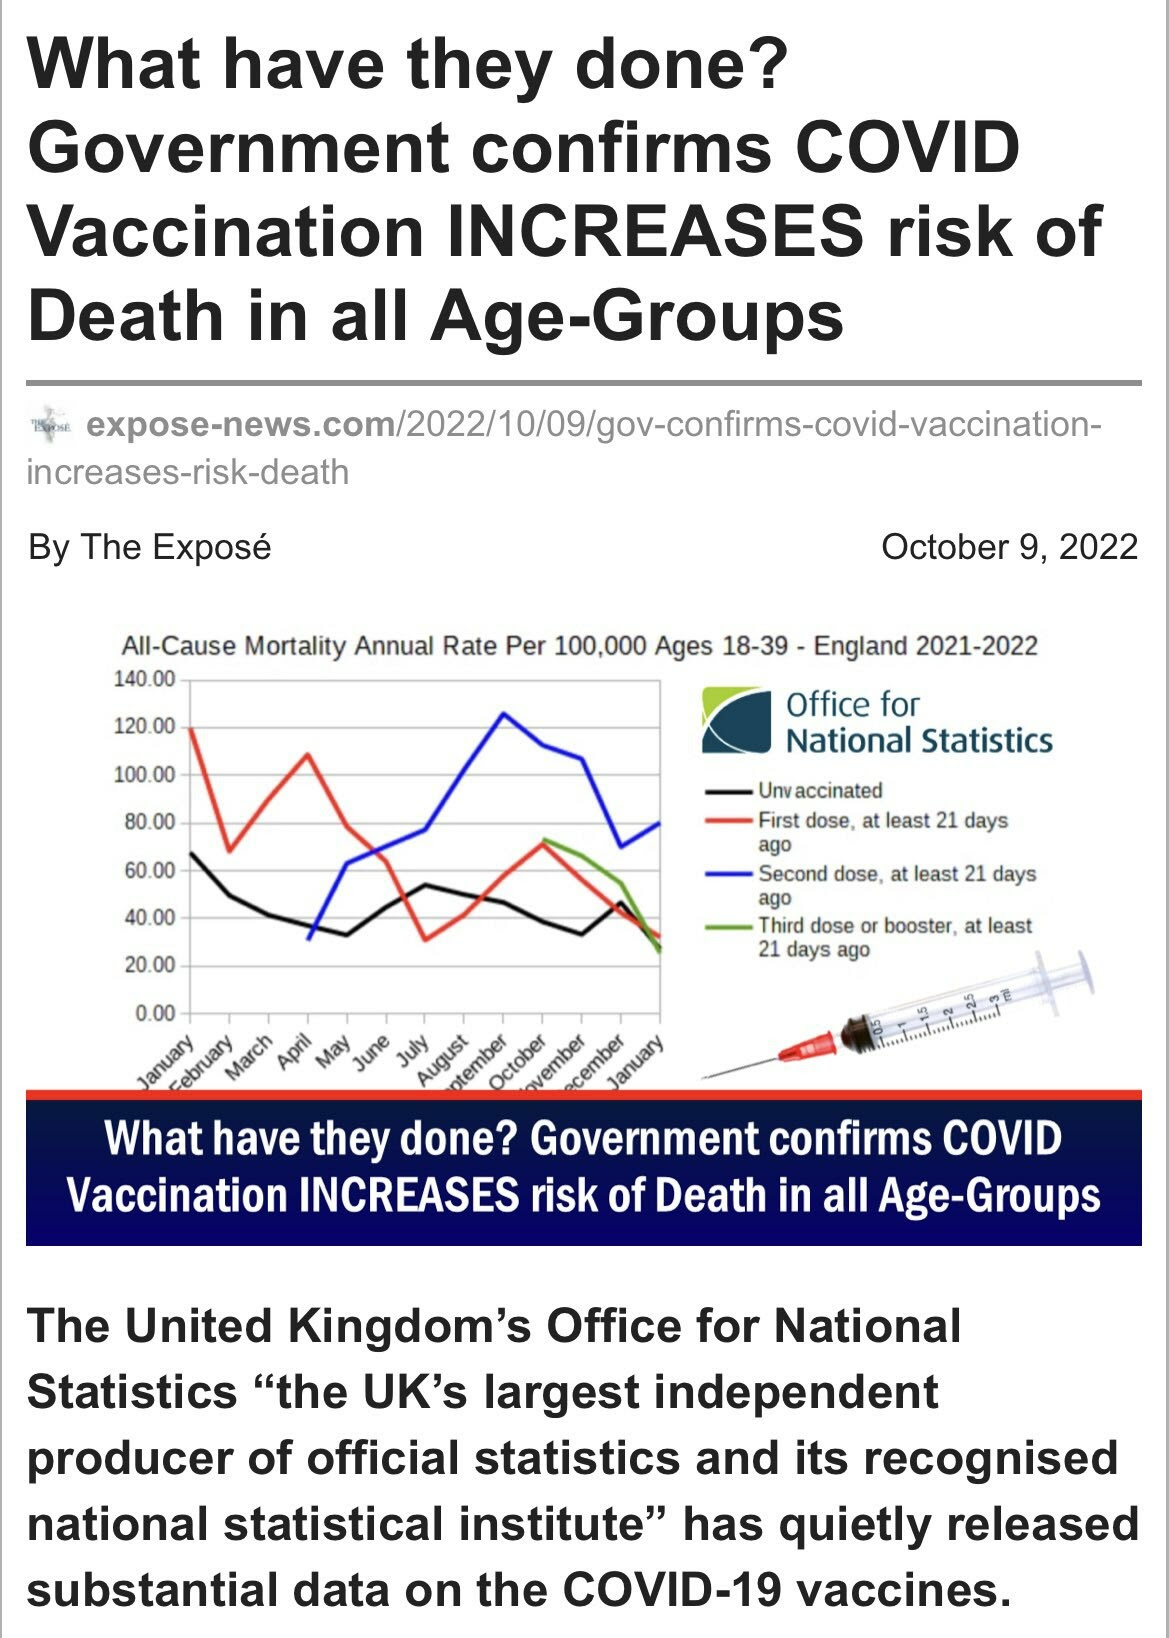 Chart showing that Covid vaccination increases risk of death in all age groups.